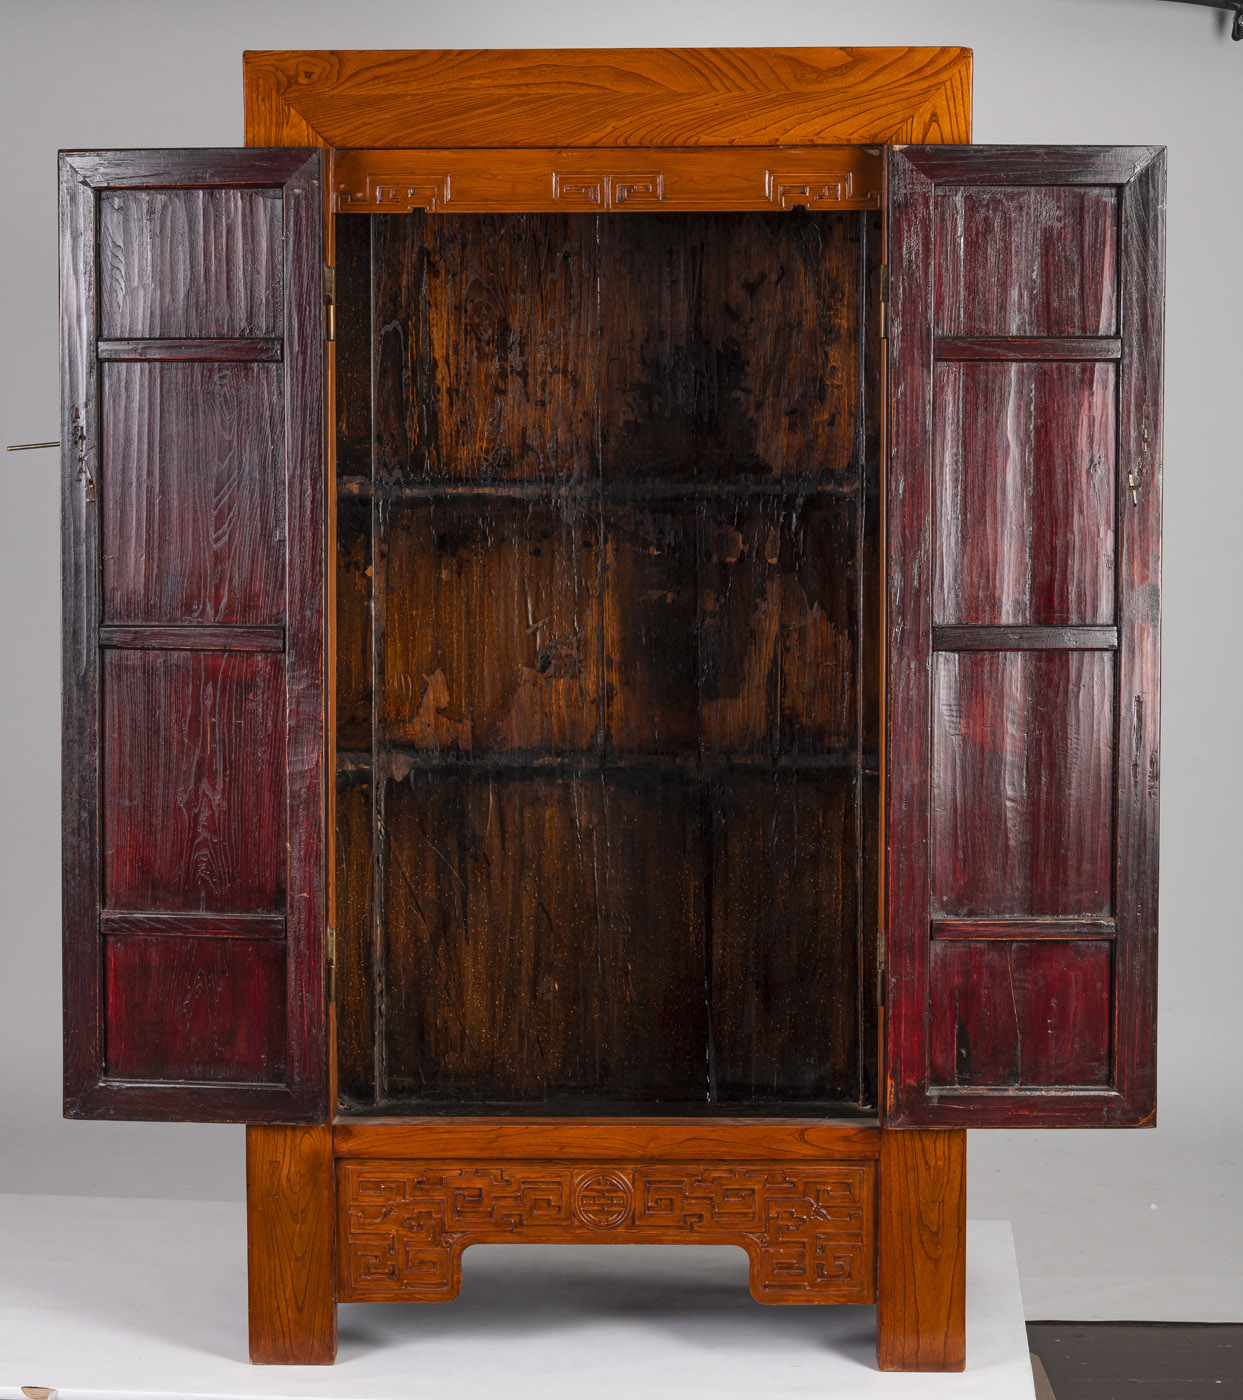 A PAIR OF WOODEN CABINETS WITH BRONZE FITTINGS, THE LOWER APRONS CARVED WIITH 'SHOU' CHARACTERS AND - Image 11 of 15